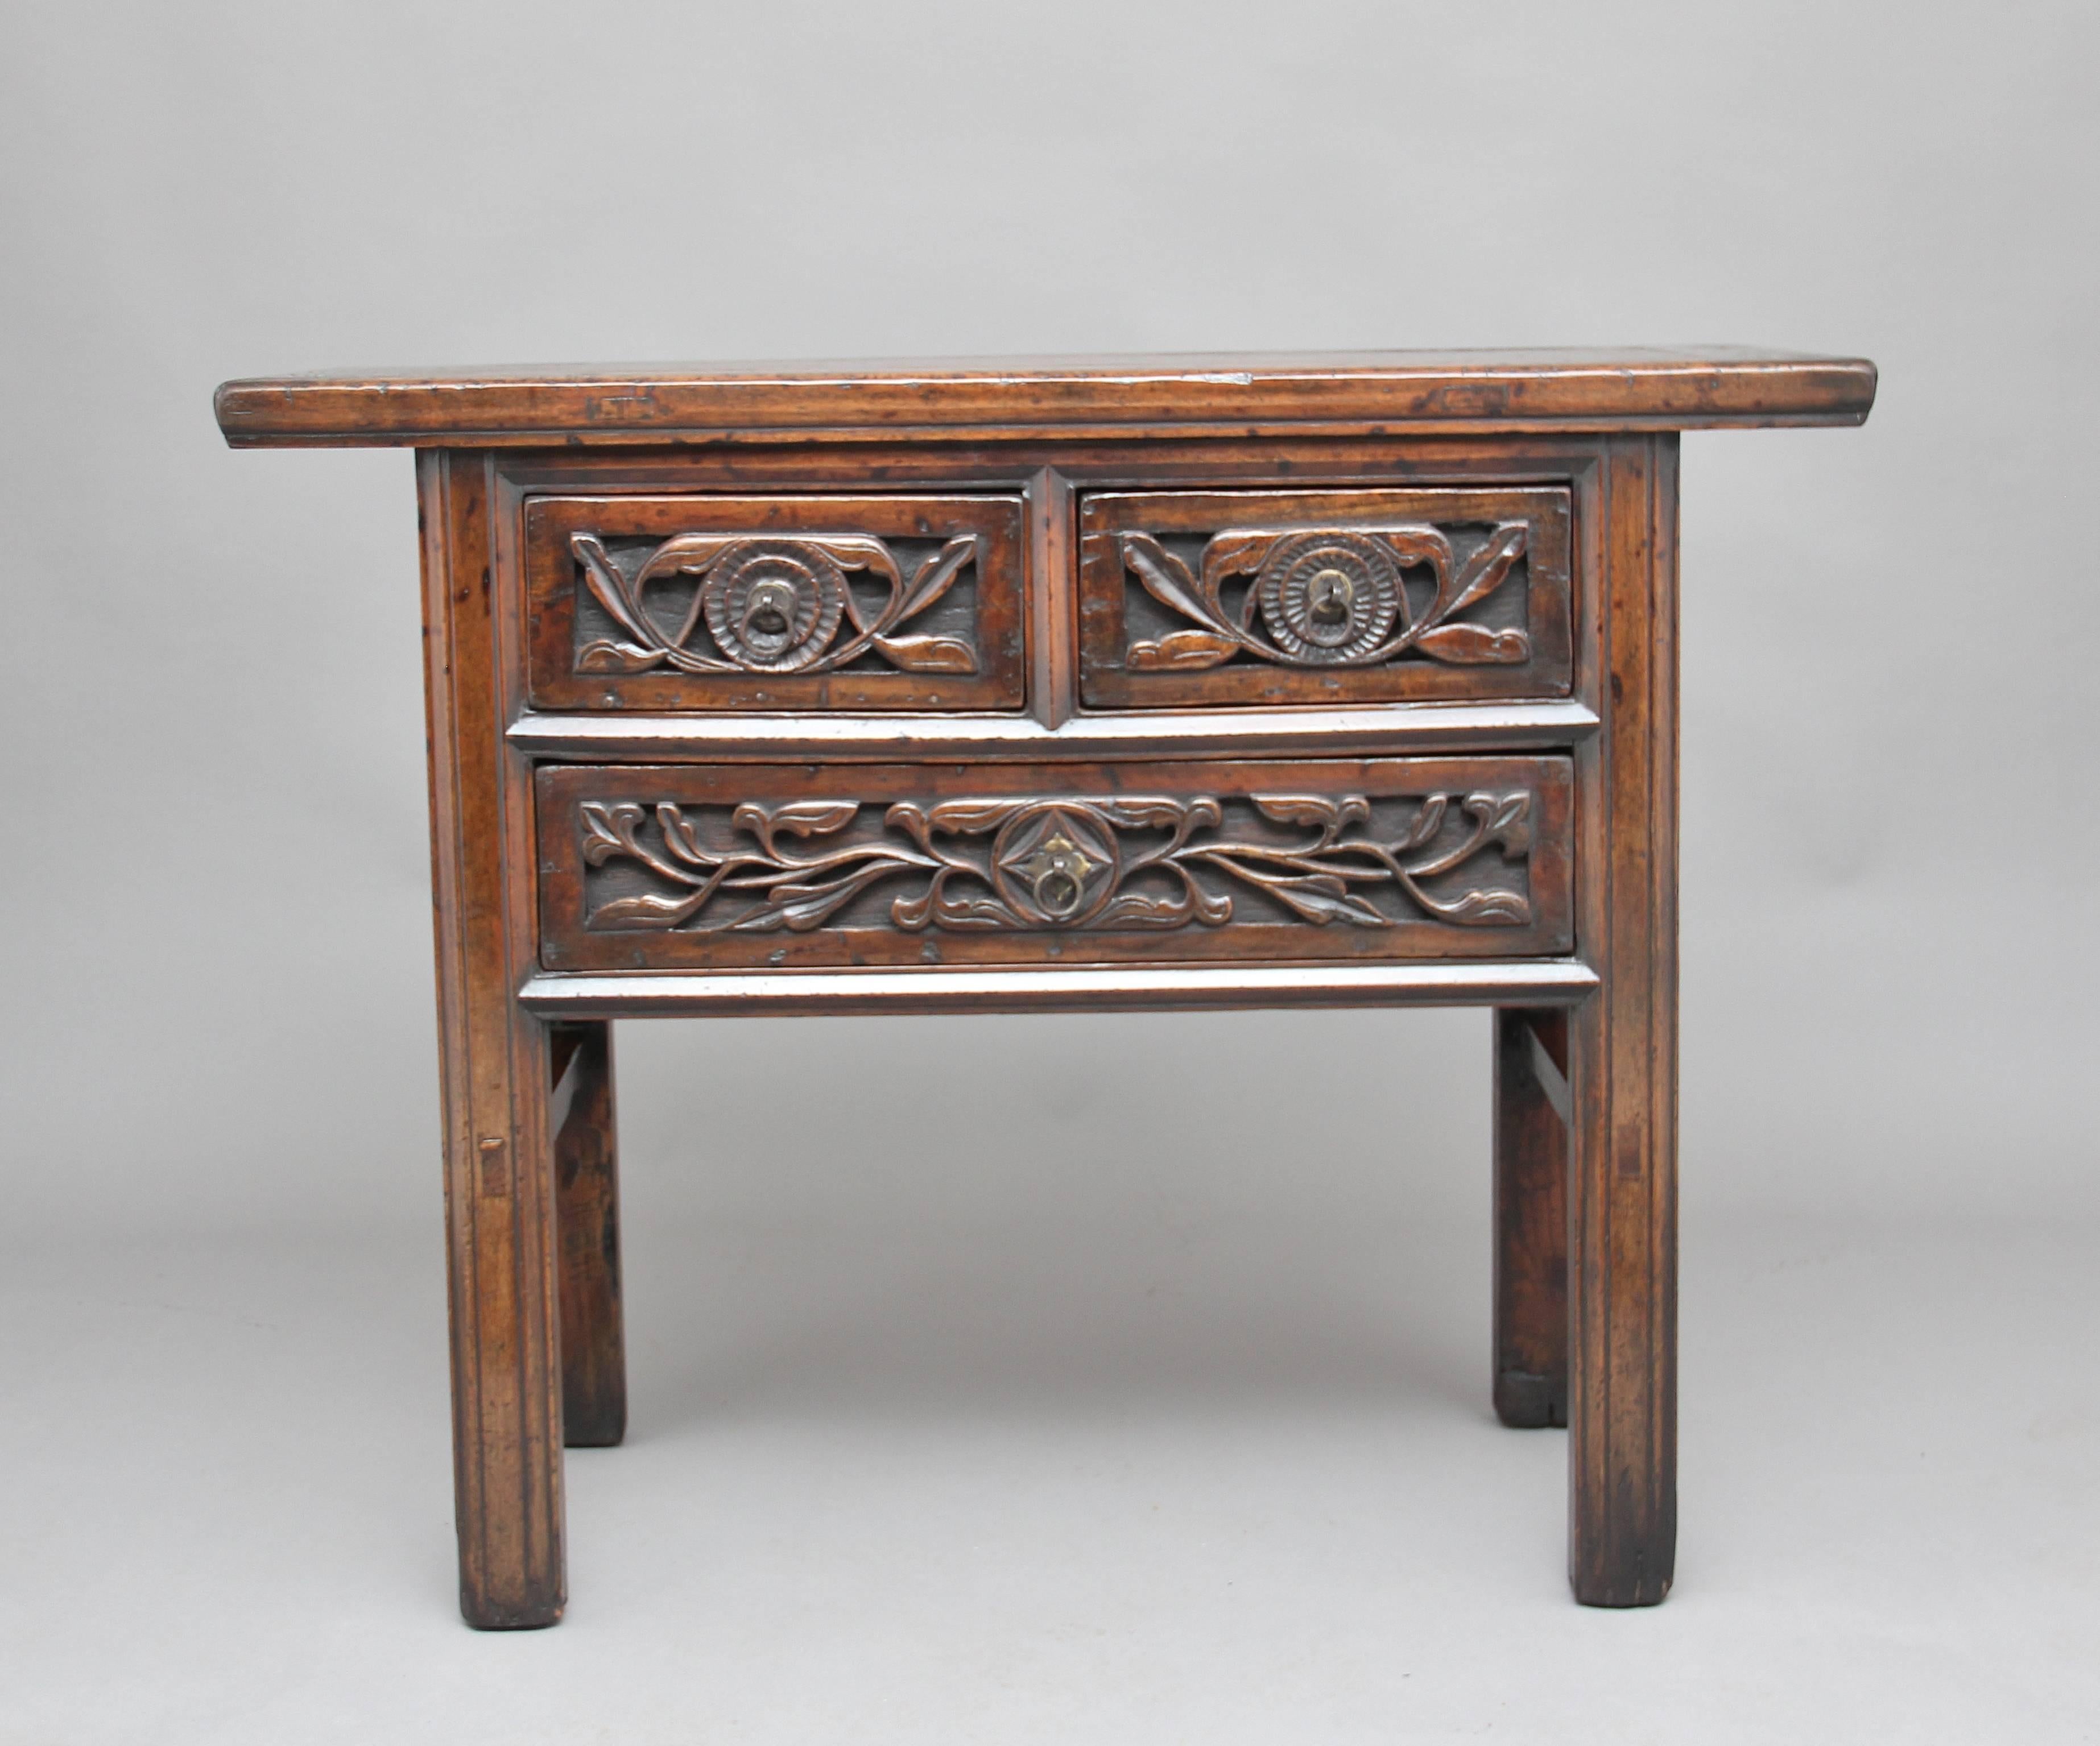 19th century Chinese rustic elm dresser with two short over one long drawer, with the drawer fronts having a carved floral design and original brass ring handles, standing on square legs supported with side stretchers, circa 1880.